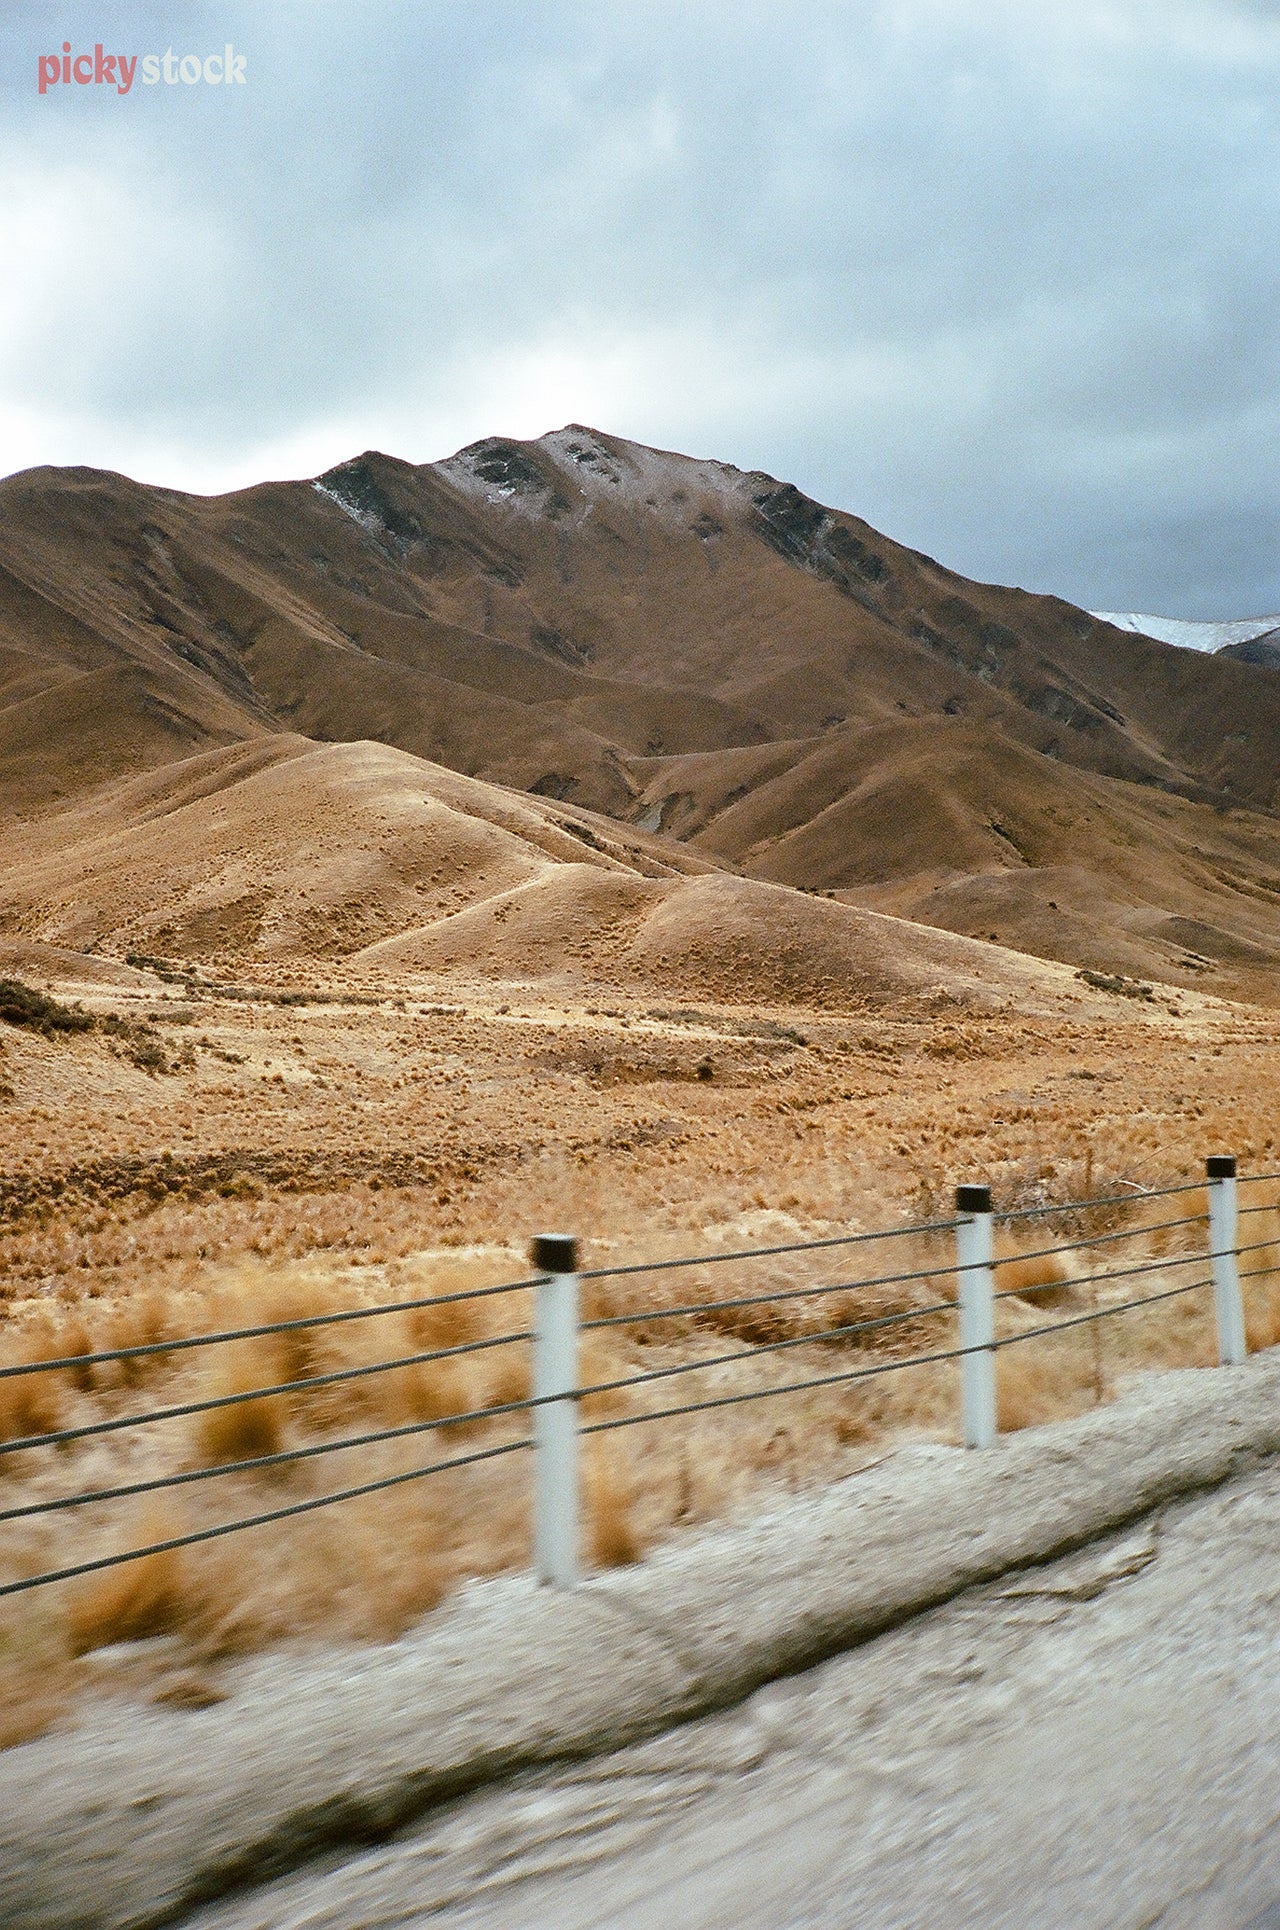 The rolling sepia-coloured hills of the Lindis Pass as seen from a car moving at speed. We see the side of the road and the road barriers before the hills.